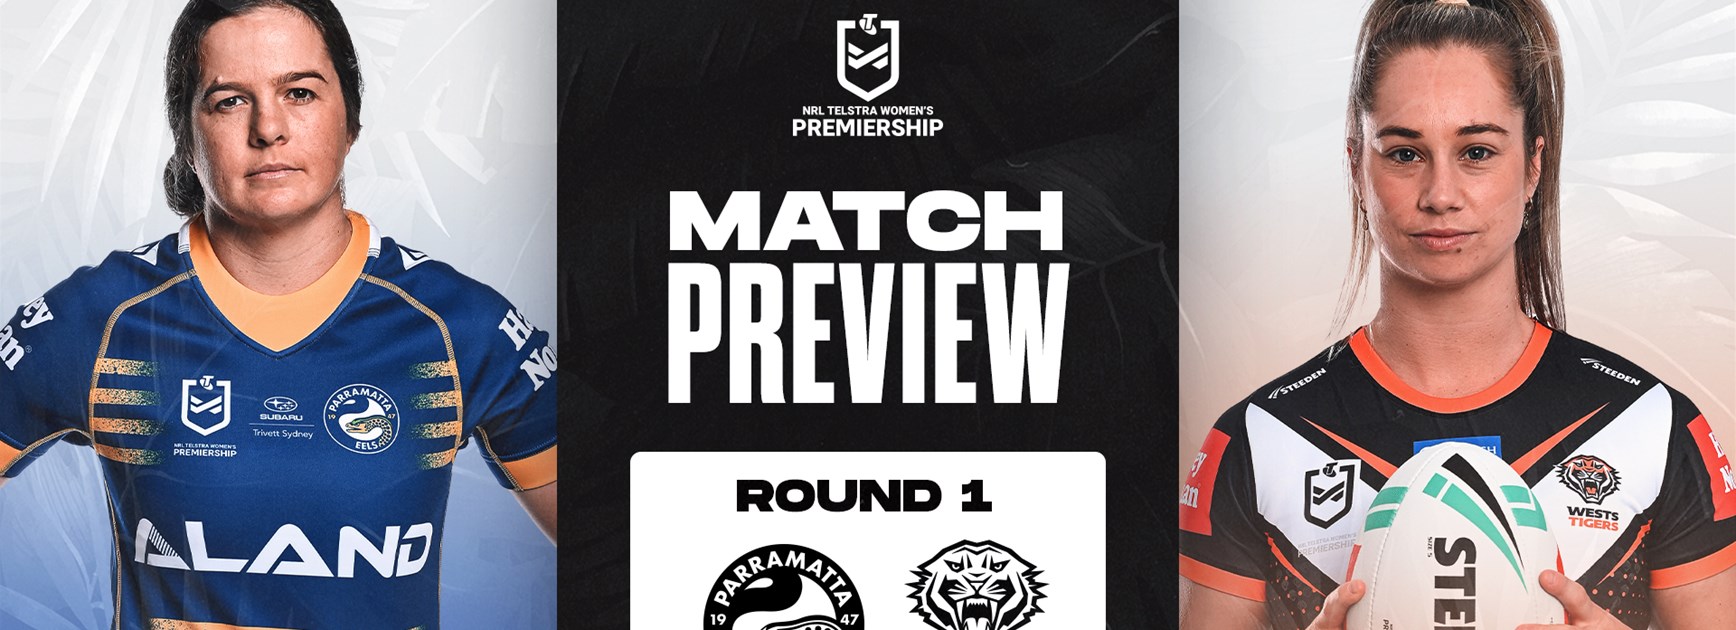 Match Preview: NRLW Round 1 vs Eels